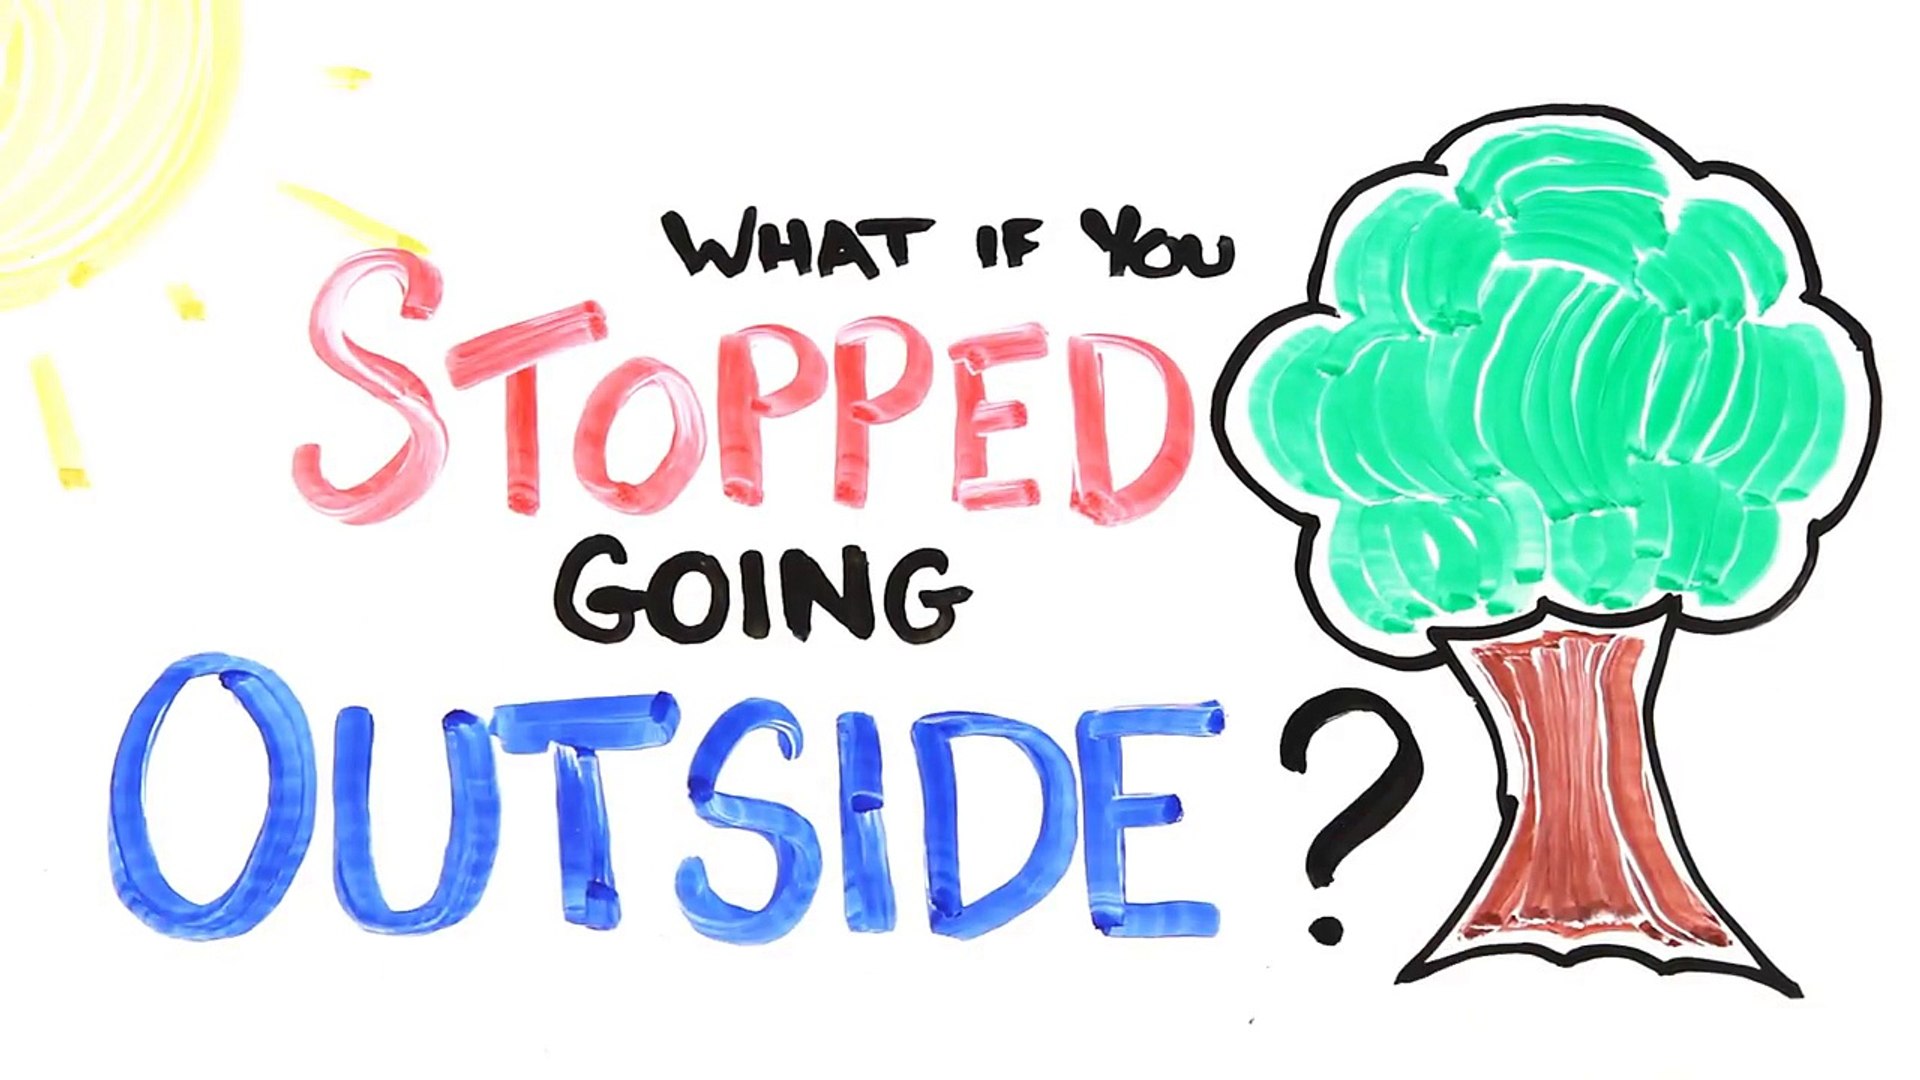 What If You Stopped Going Outside?